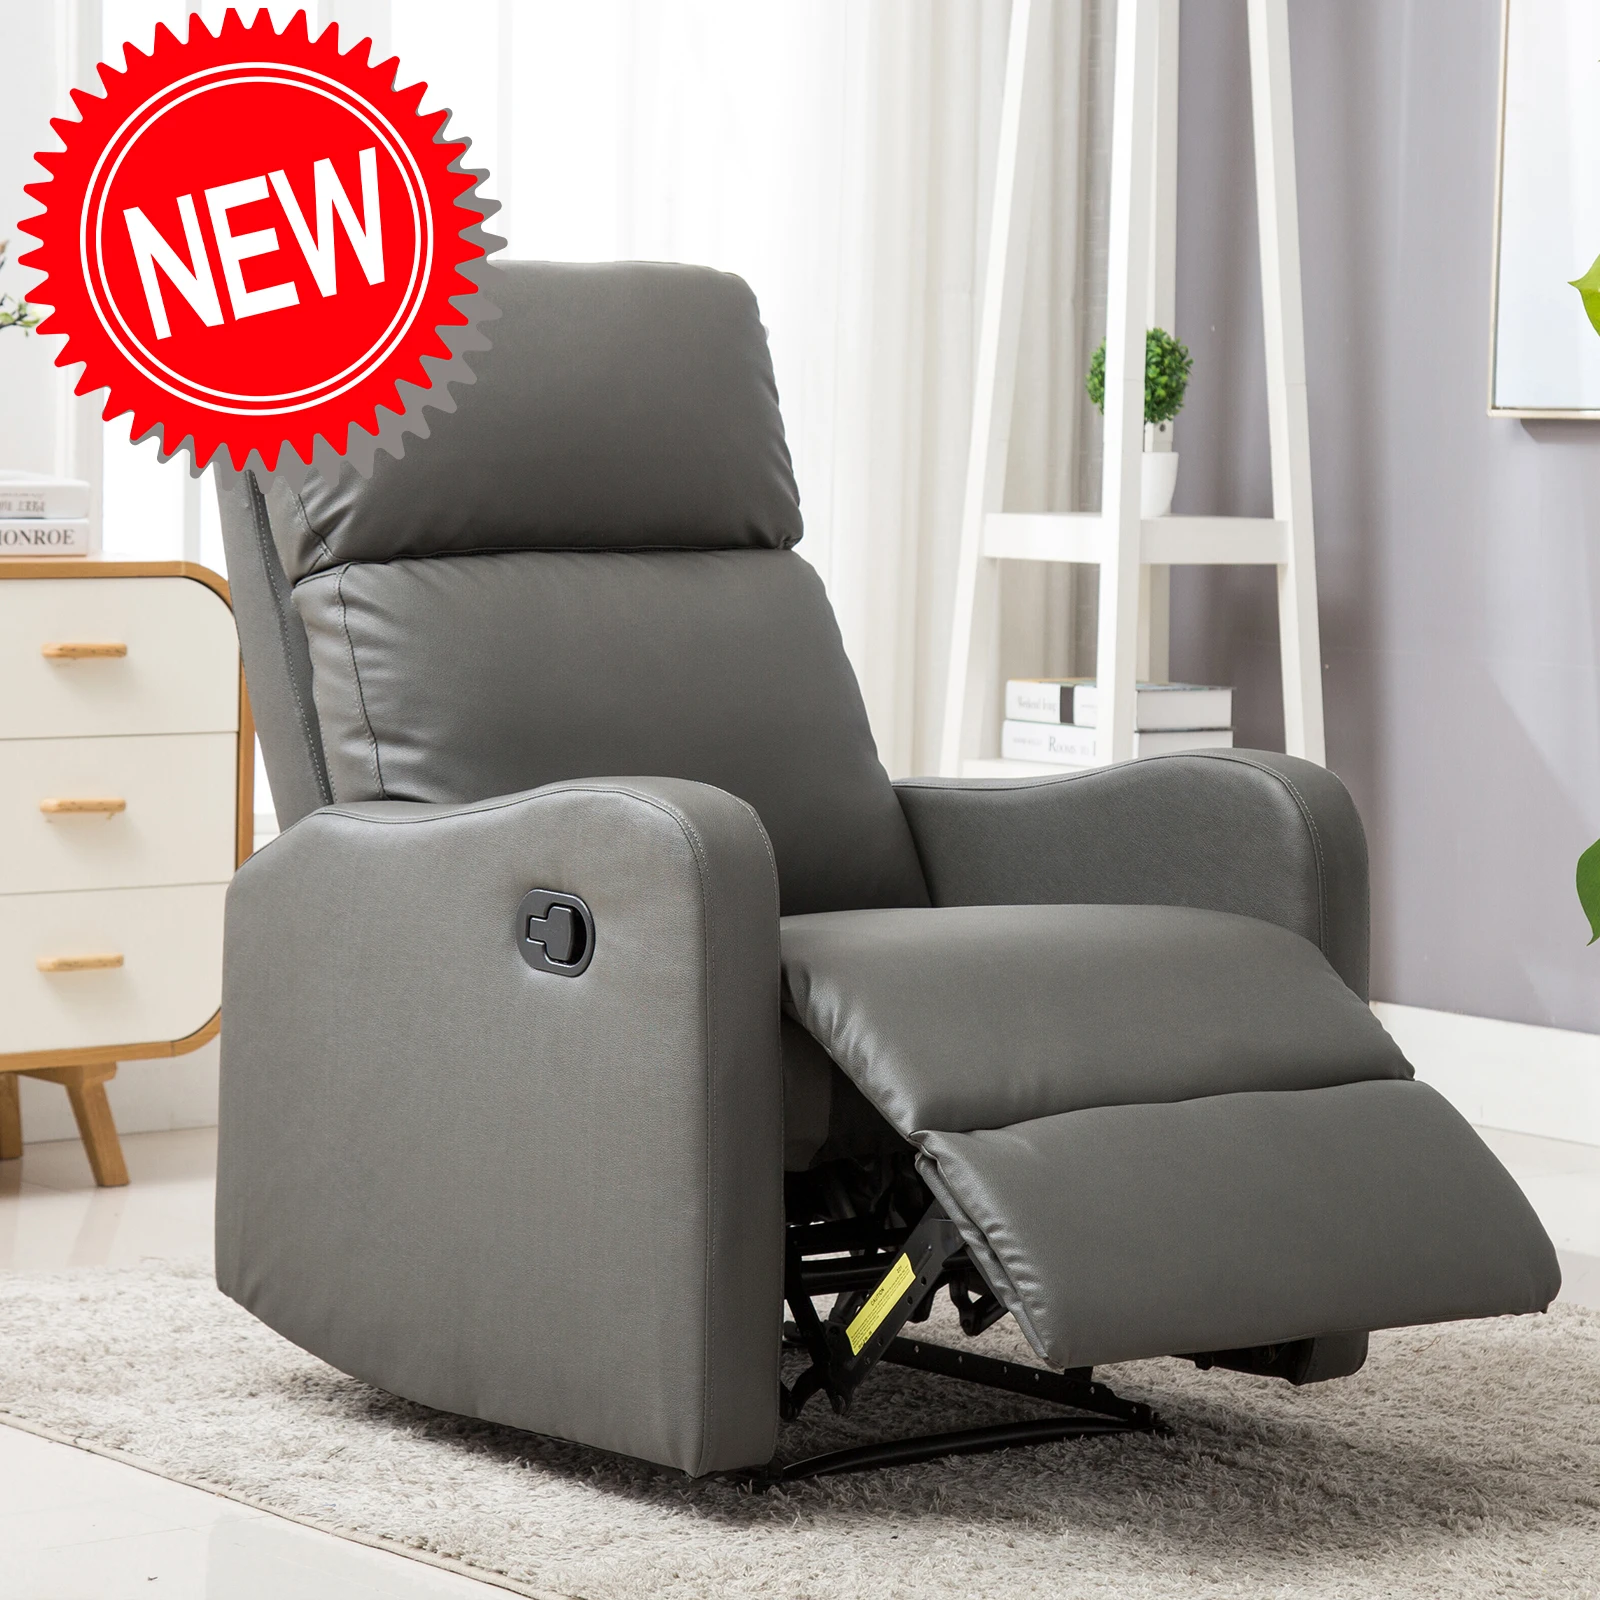 

Sofa furniture Lounge Relaxing Chair Armchairs Sofas Rocking Chair Recliner Manual Reclining Single Couch Wide Seat